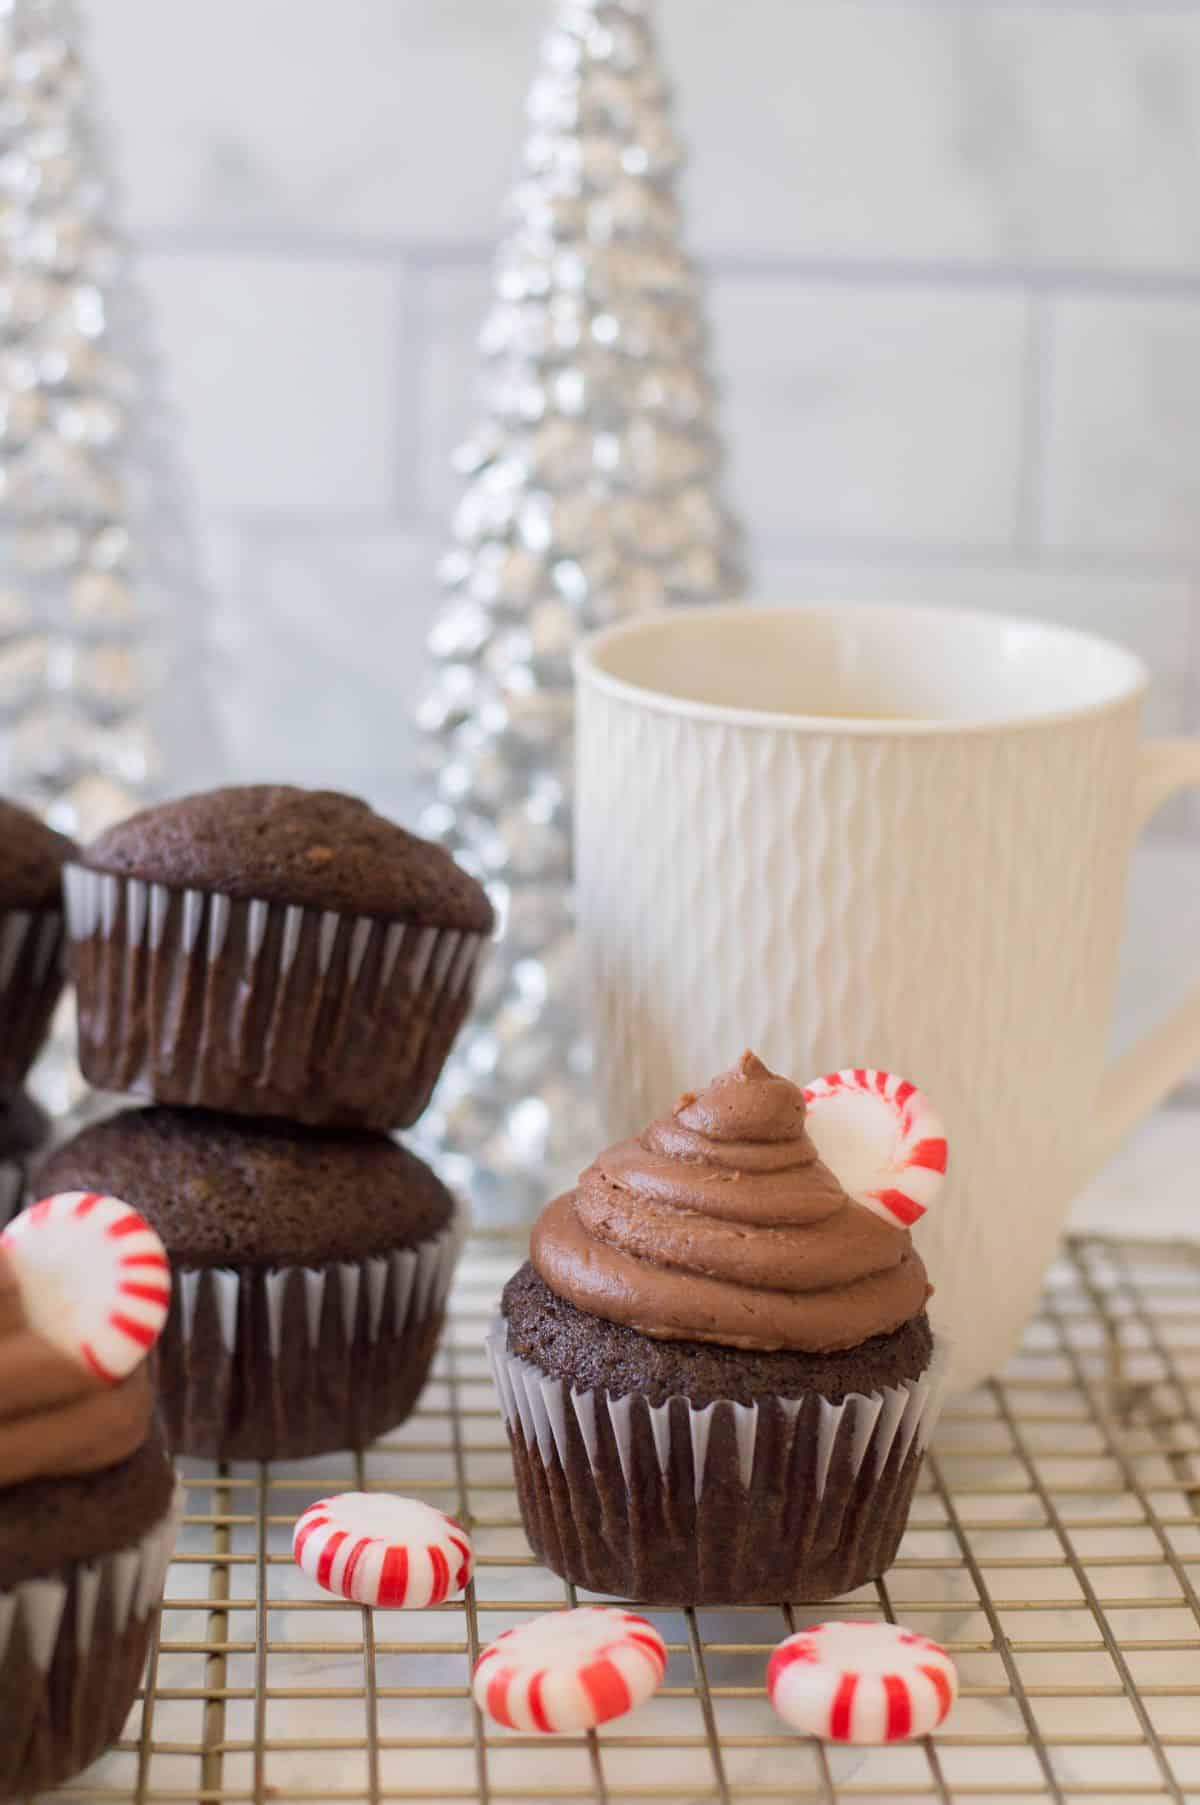 Peppermint Mocha Cupcakes on a baking rack, topped with peppermint candy.